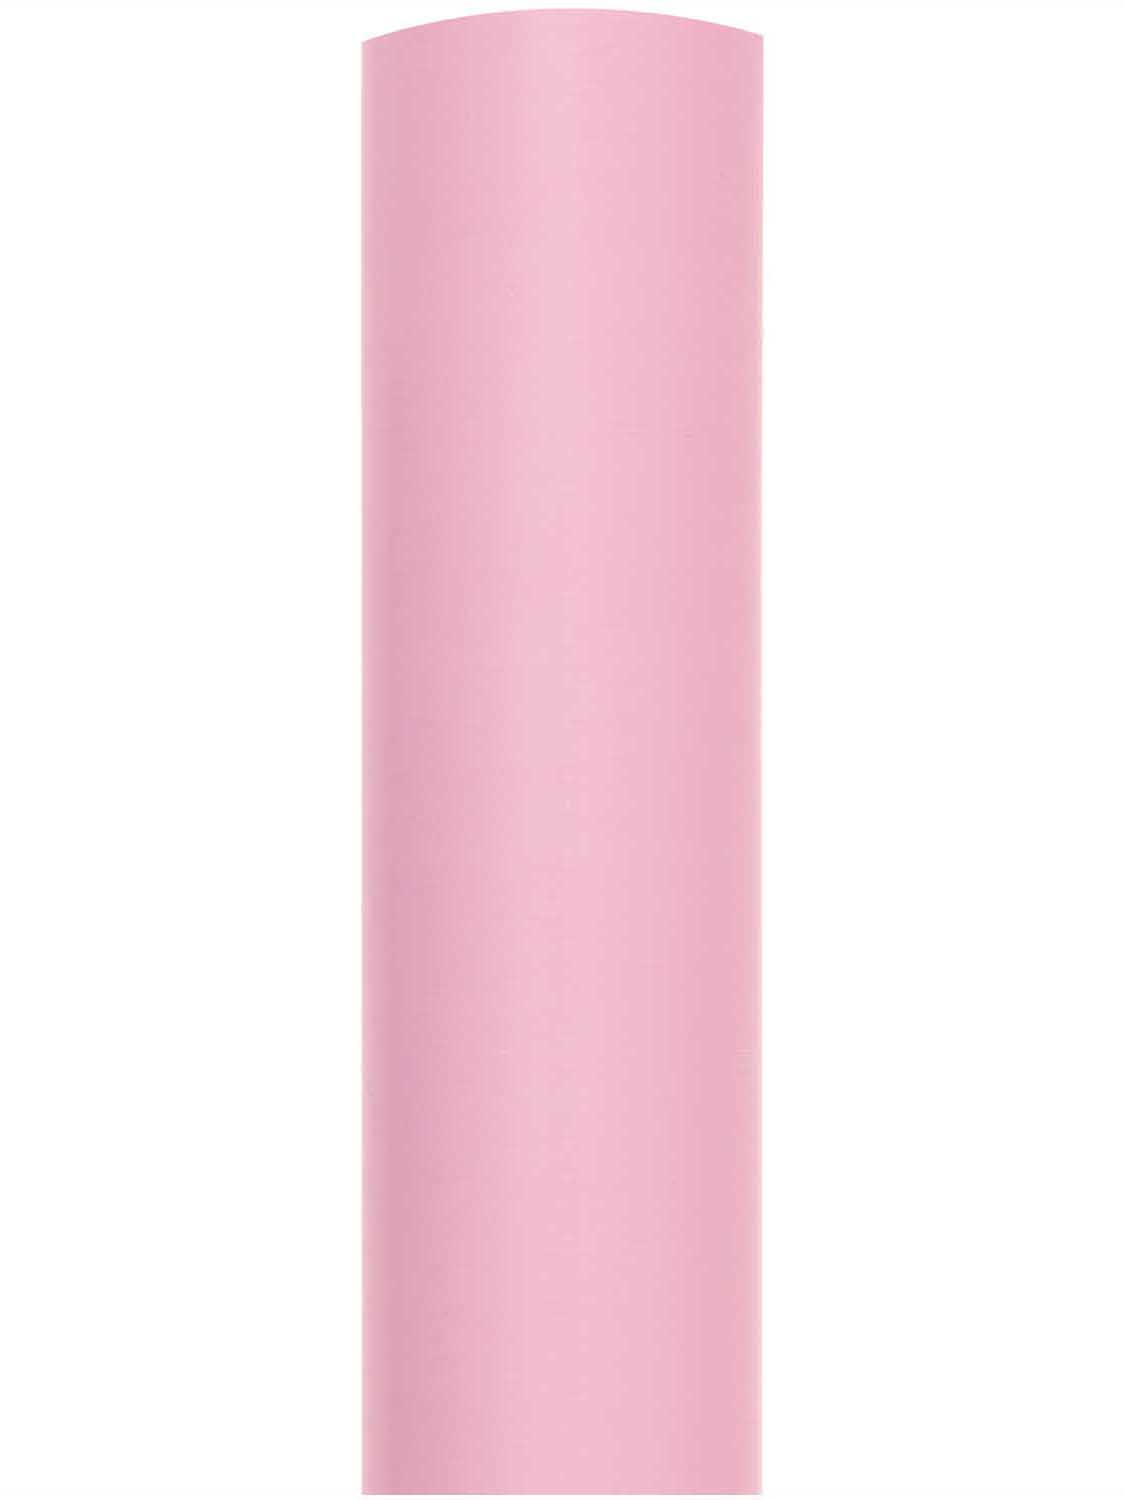 Wrapping paper, light pink (3 m)